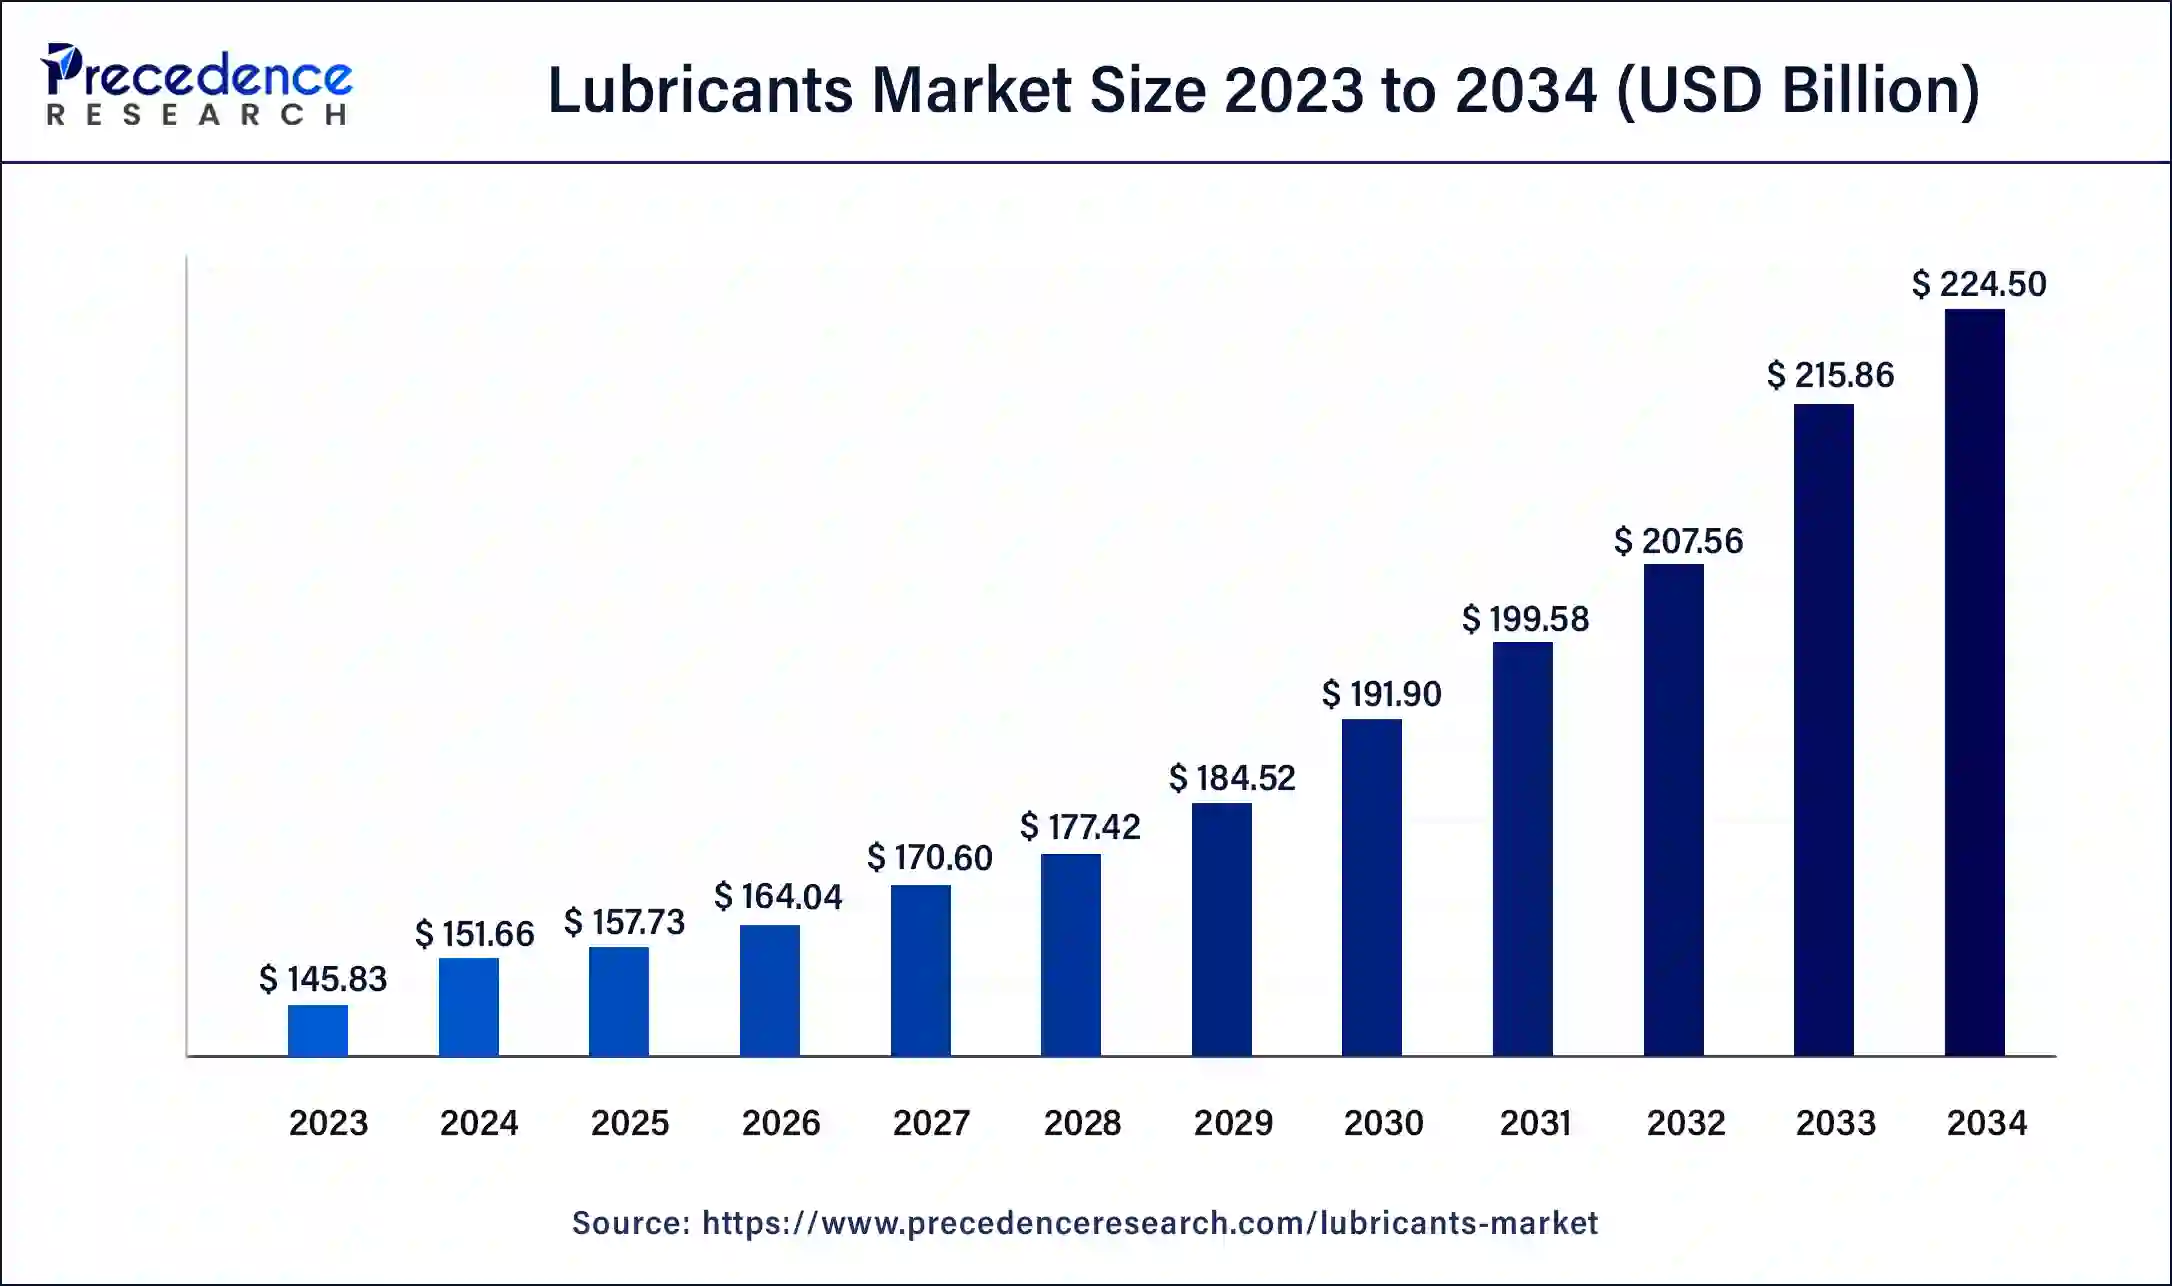 Lubricants Market Size 2024 to 2034